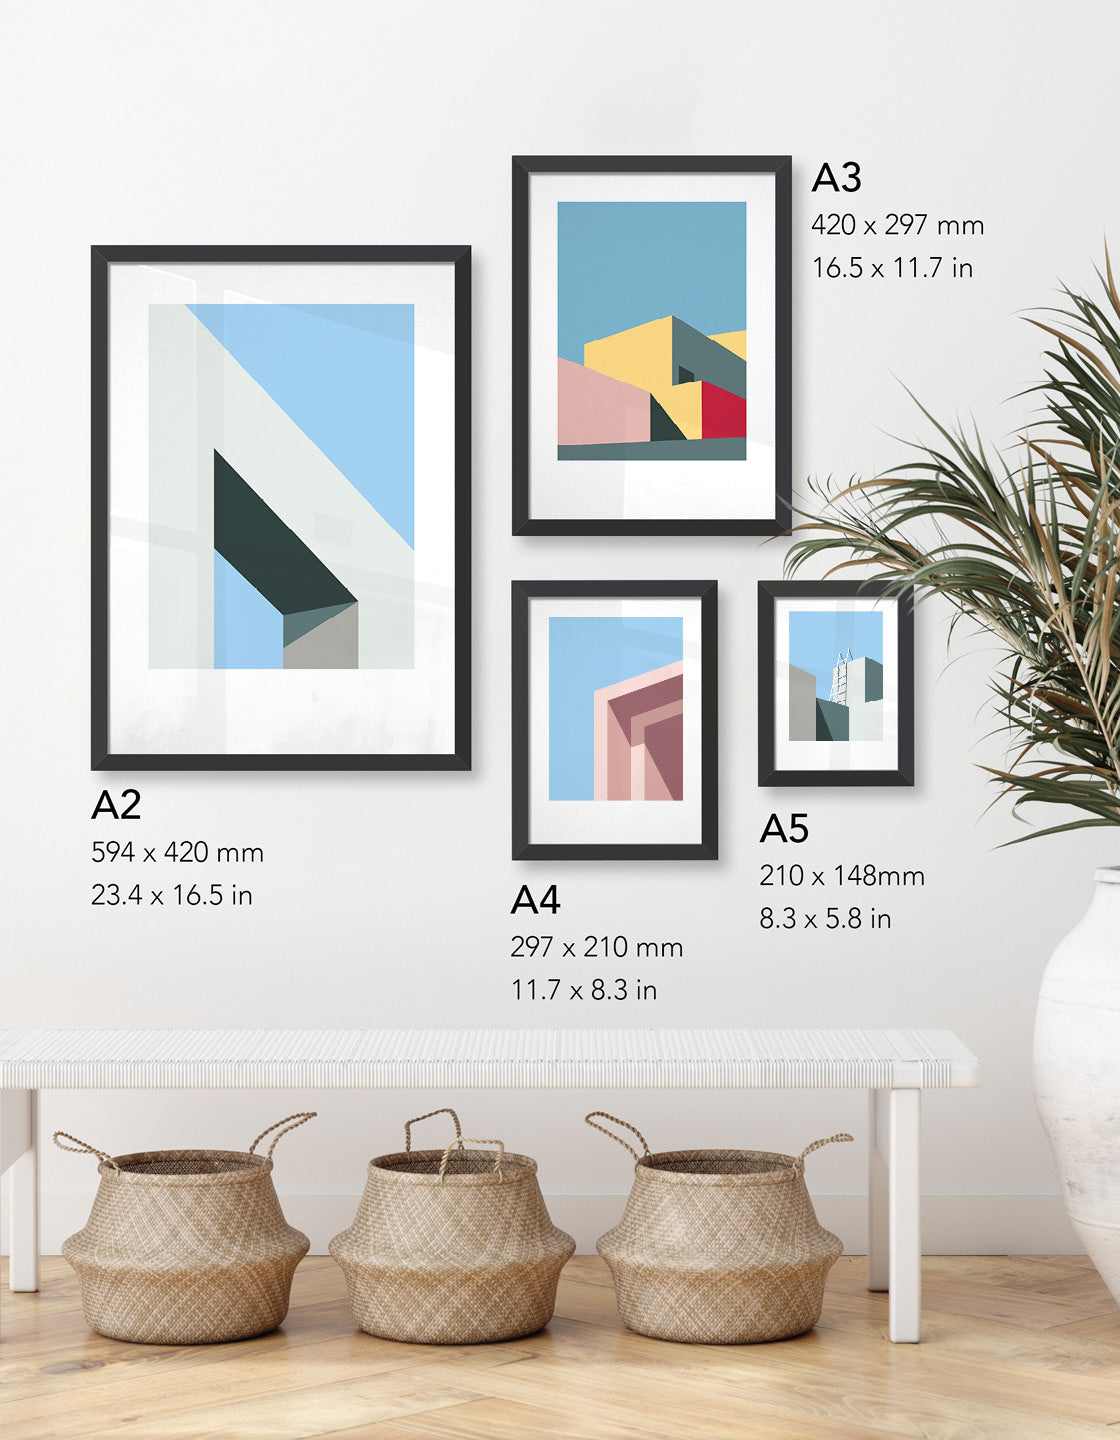 Image showing a variety of styles from the abstract collection in a gallery wall setting to illustrate the different sizes 